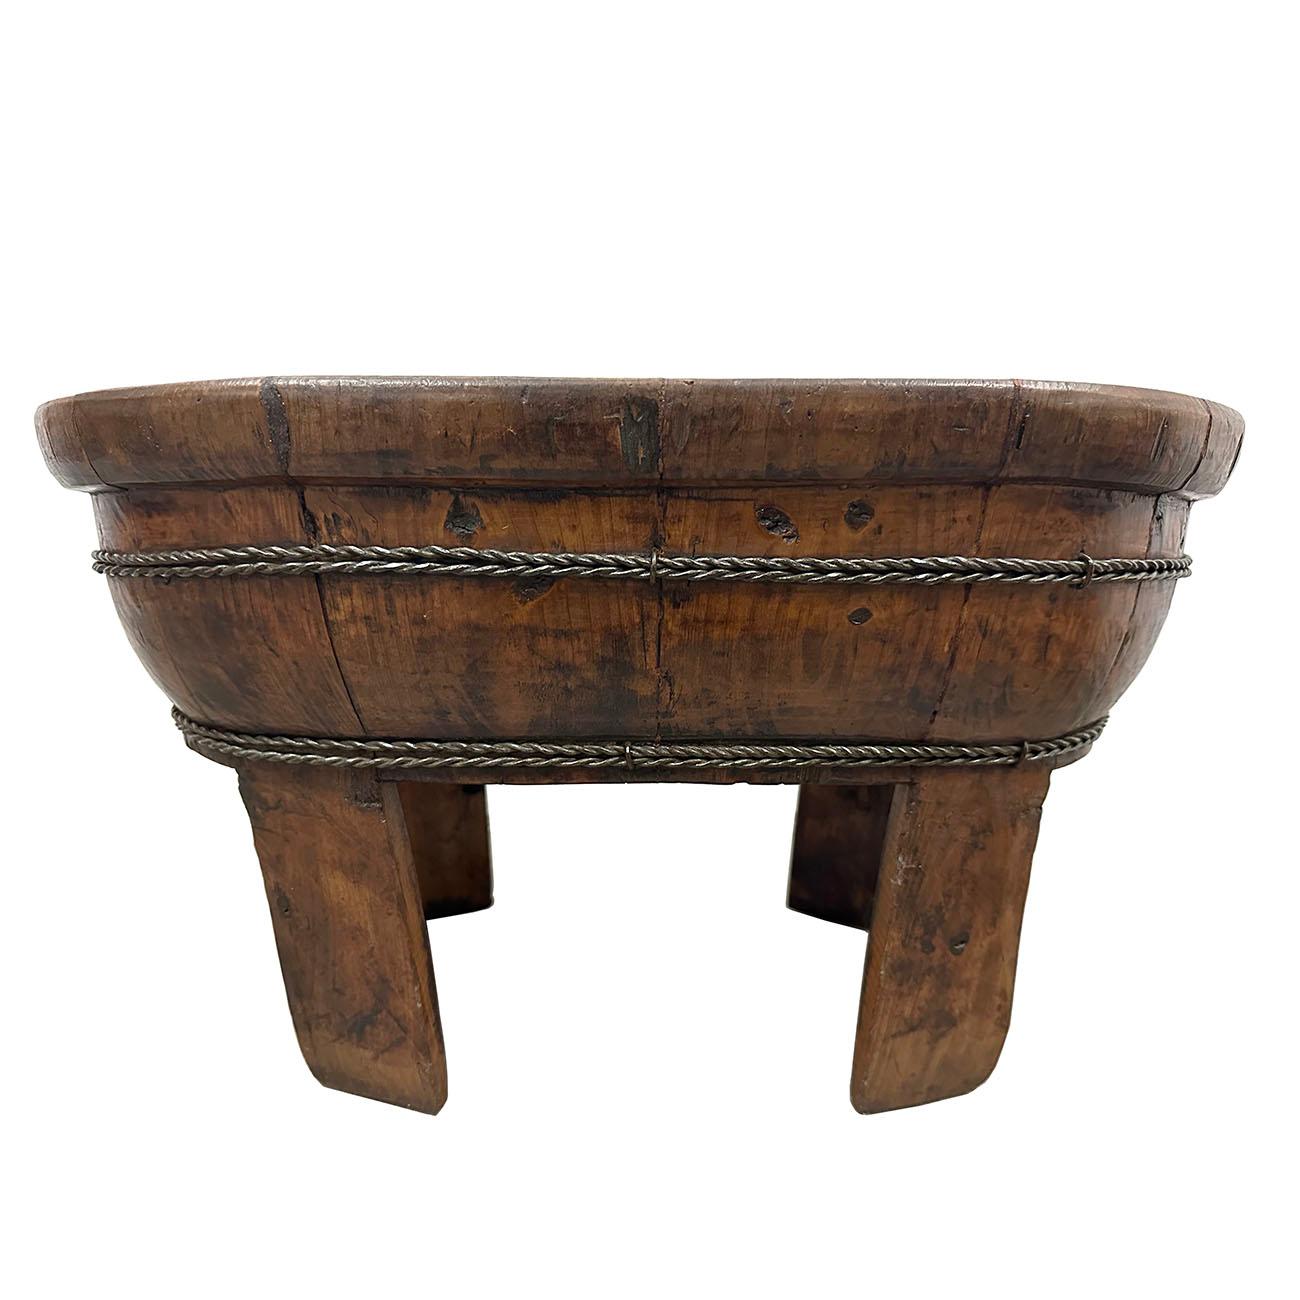 Early 20th Century Chinese Hand Made Wooden Wash/Laundry Basin 4